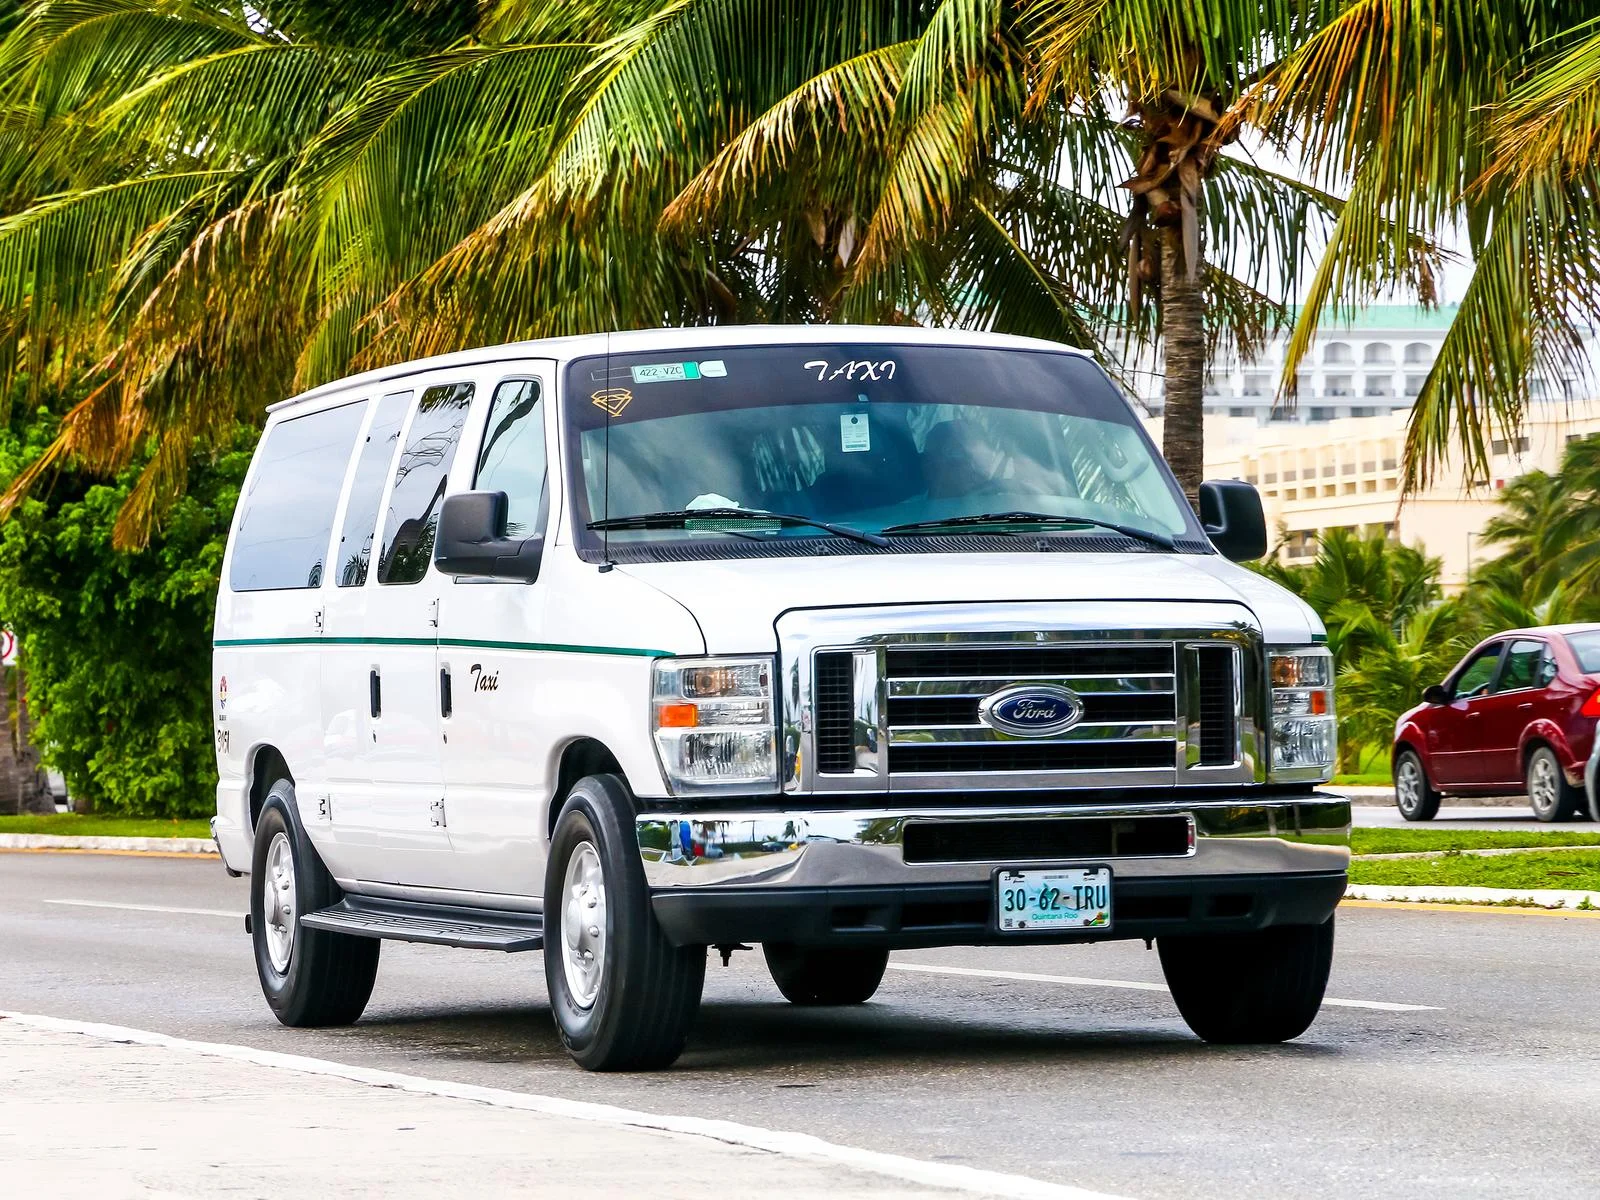 Image of a taxi van in Cabo in front of palm trees